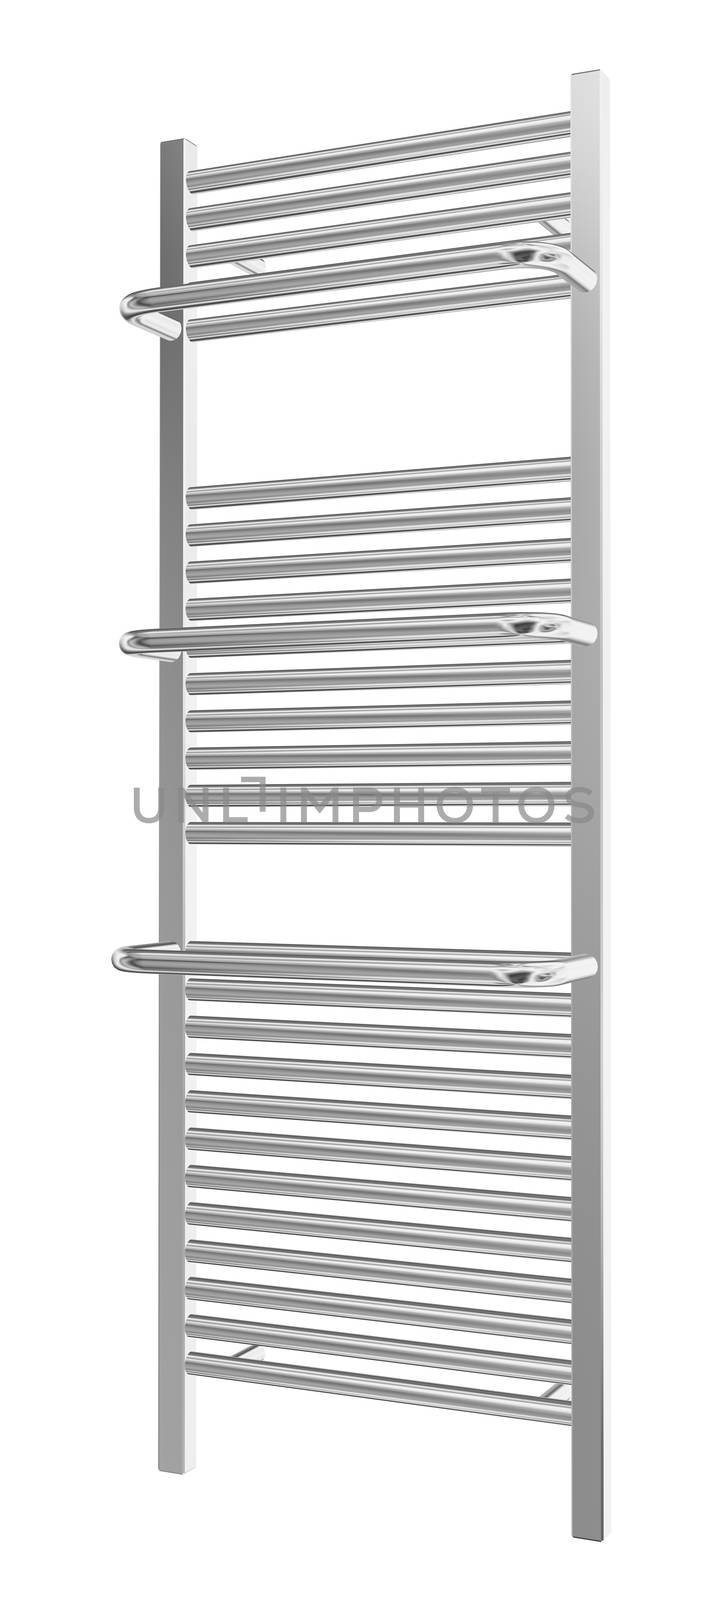 Wall-mounted towel rack with chrome finishing, 3d illustration by Morphart